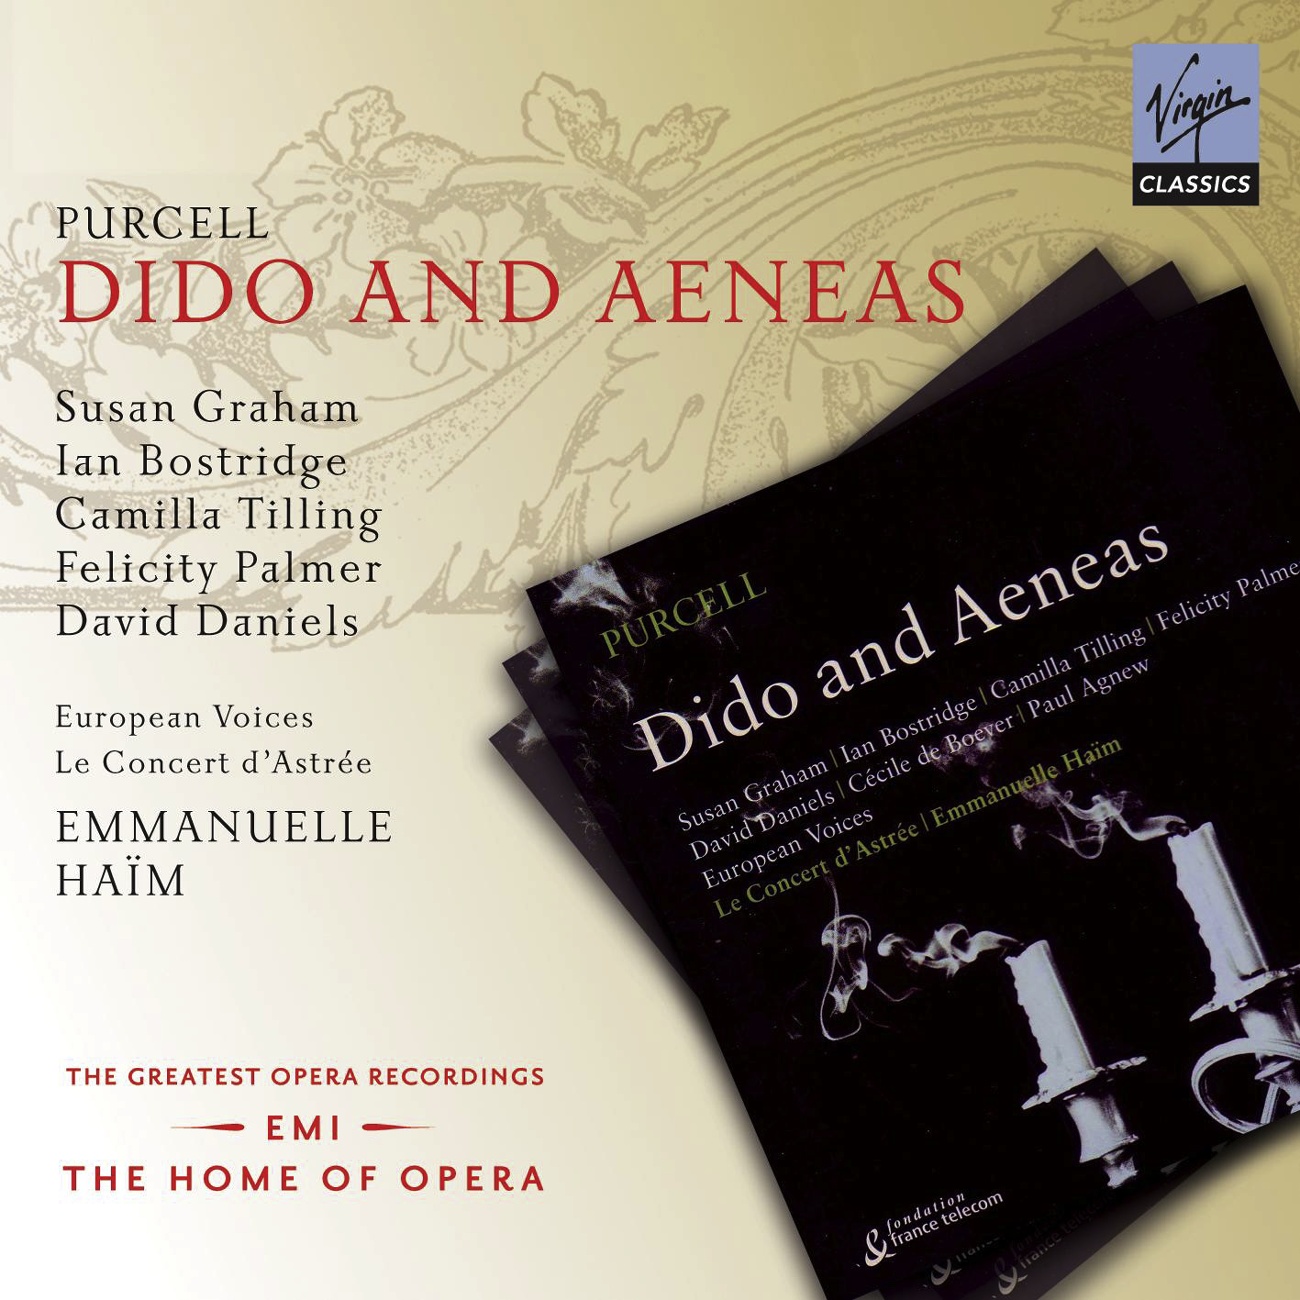 Dido and Aeneas, ACT 1: Scene: The Palast: If not for mine, for Empire's sake (Aeneas-Belinda)